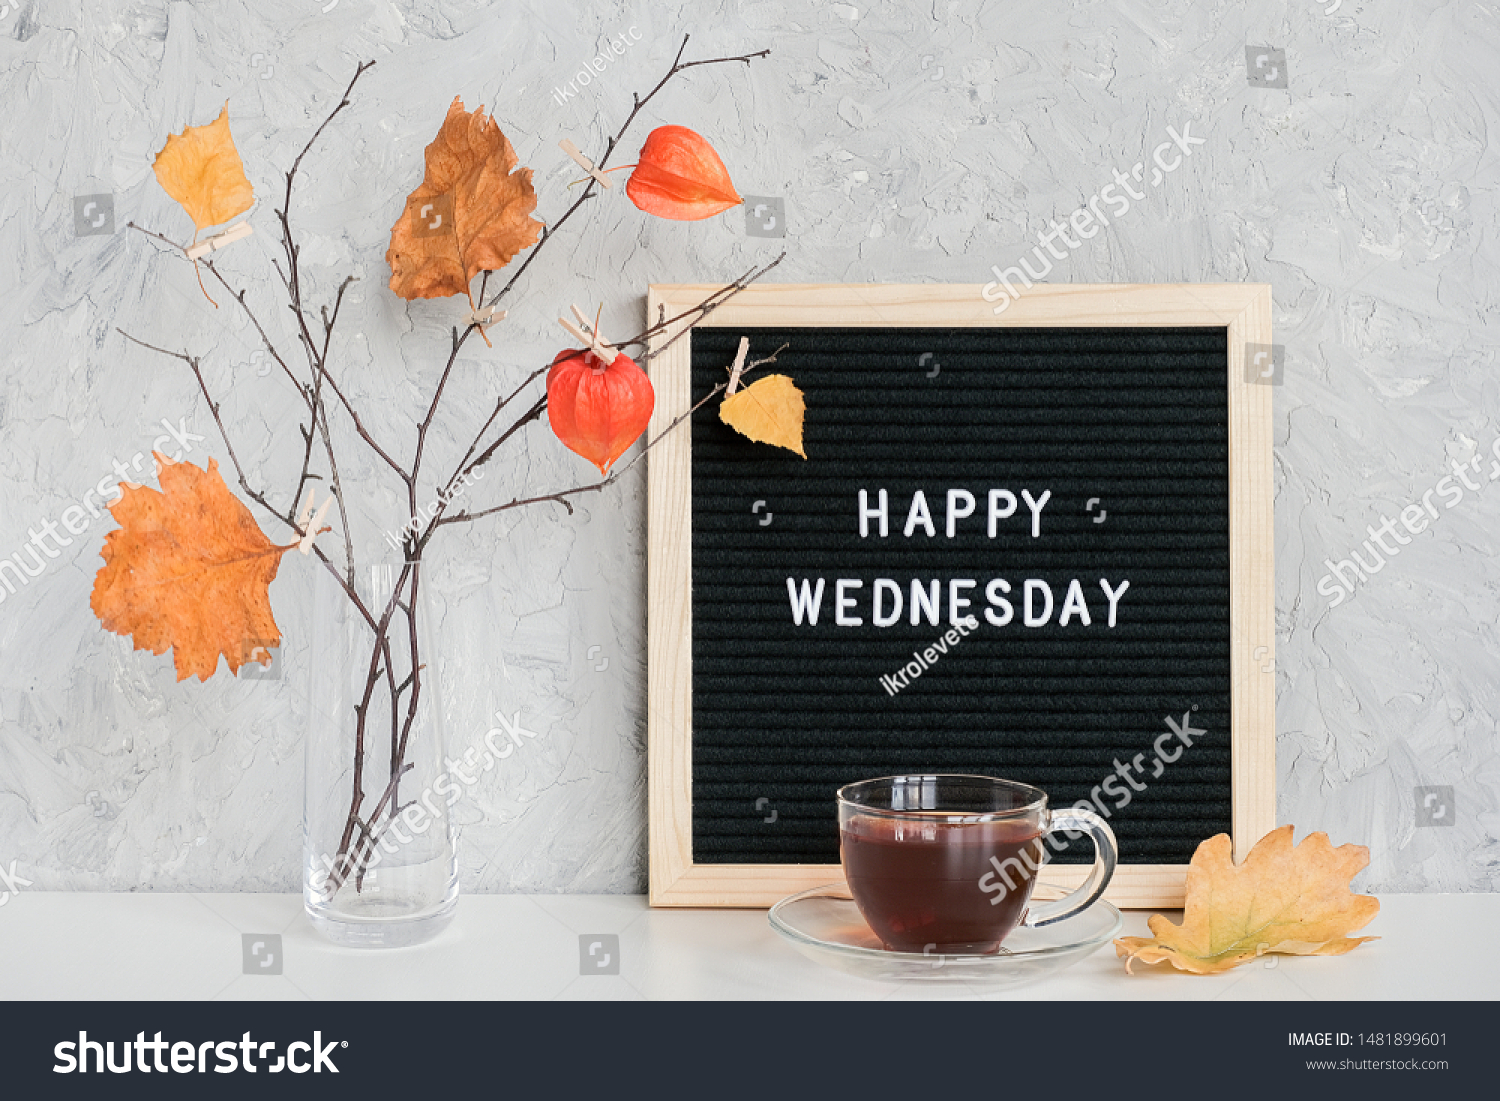 Happy Wednesday text on black letter board and bouquet of branches with yellow leaves on clothespins in vase on table Template for postcard, greeting card Concept Hello autumn Wednesday. #1481899601